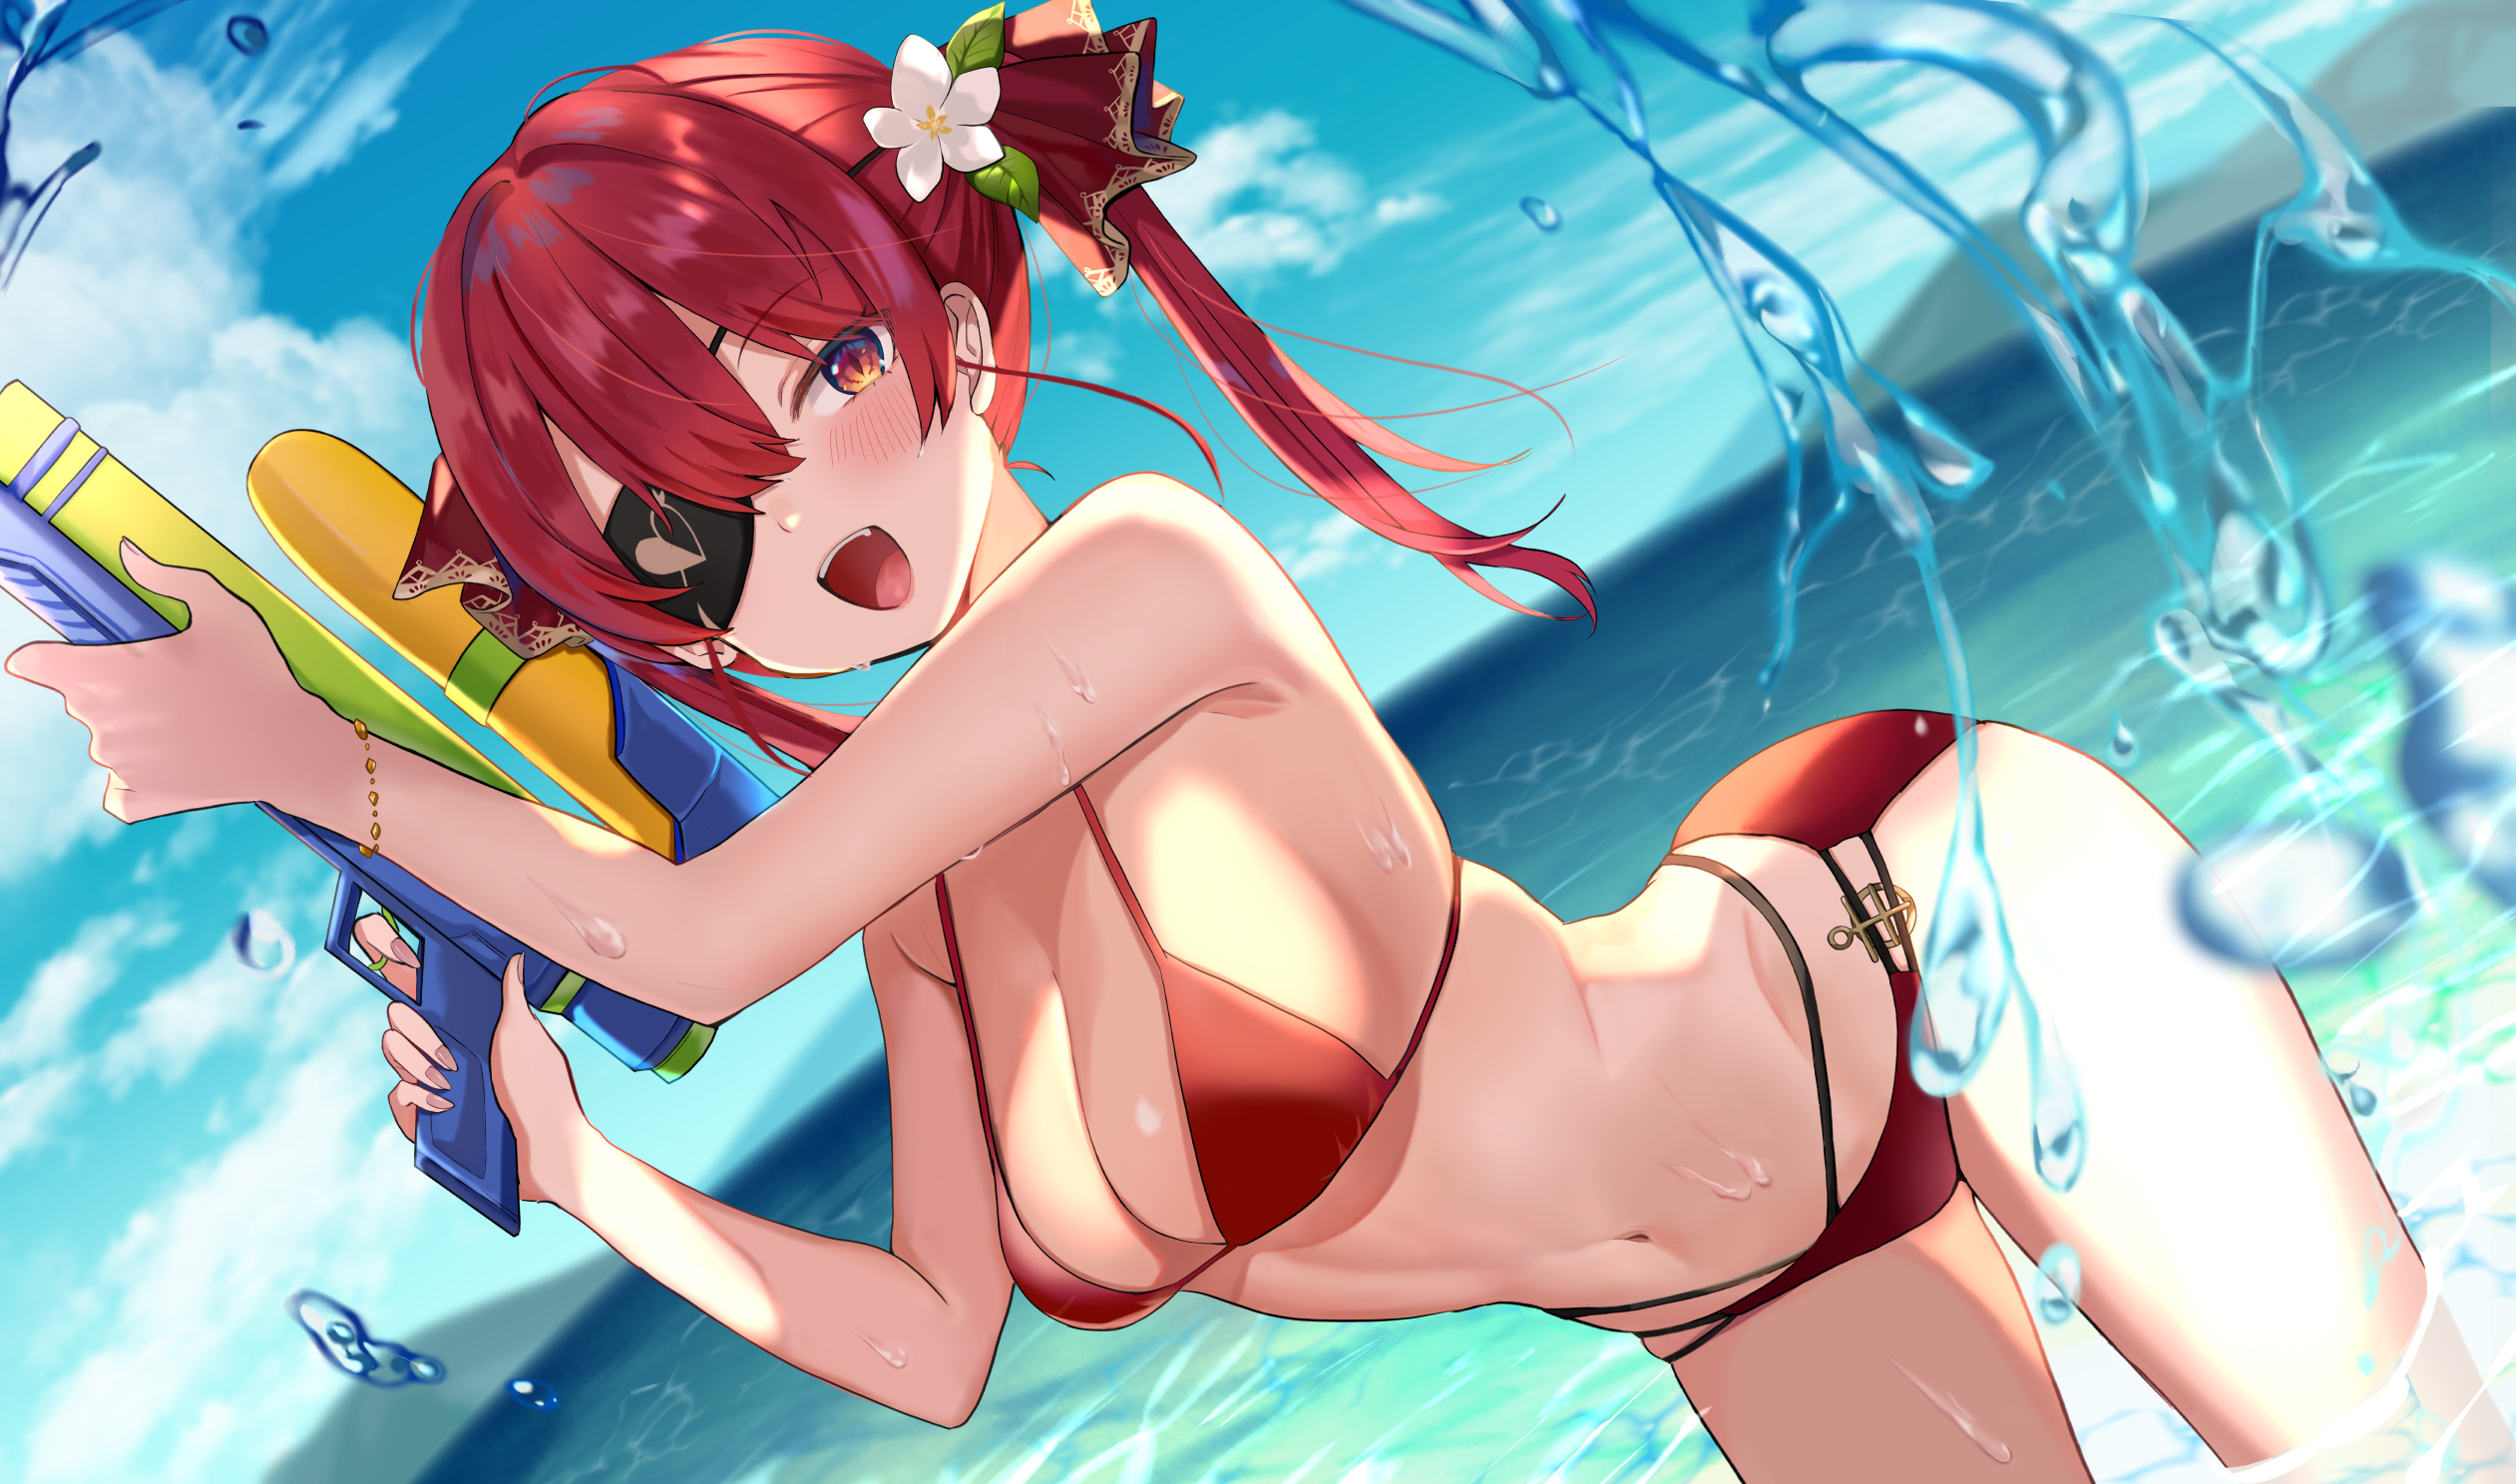 Anime 2522x1488 Houshou Marine Hololive anime anime girls bikini cleavage redhead twintails eyepatches brown eyes Satoupote Virtual Youtuber water drops water guns flower in hair wet body standing in water